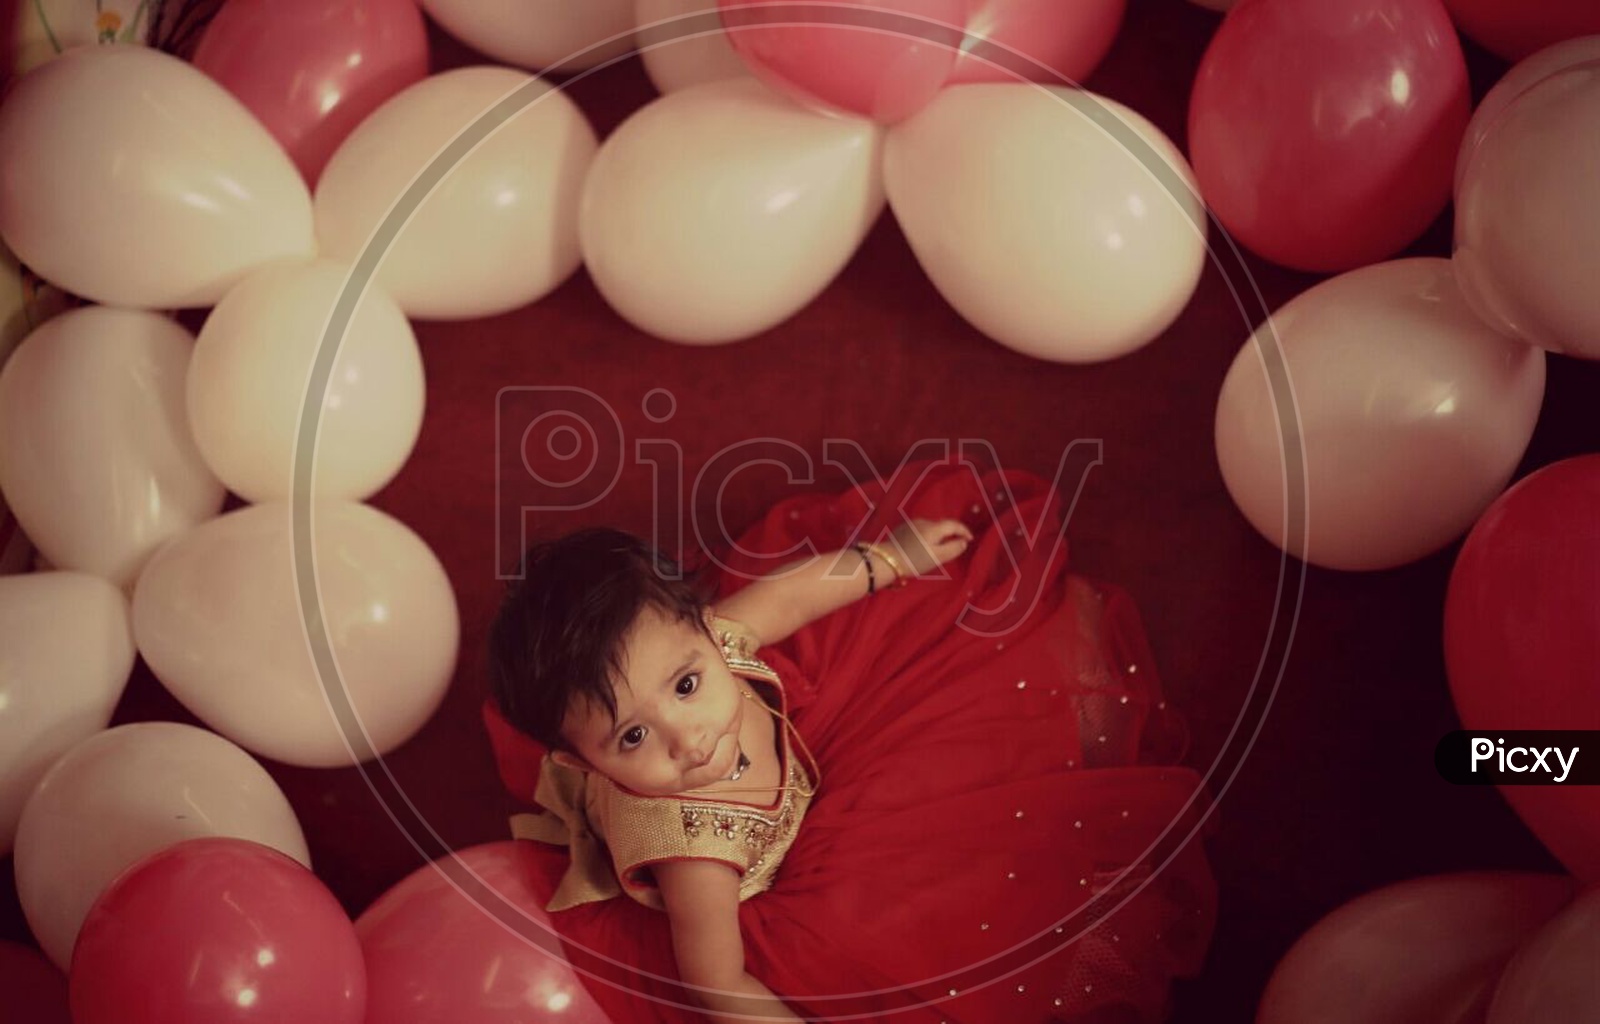 Indian baby Girl in red Frock Looking into Camera with Baloons All Around Her